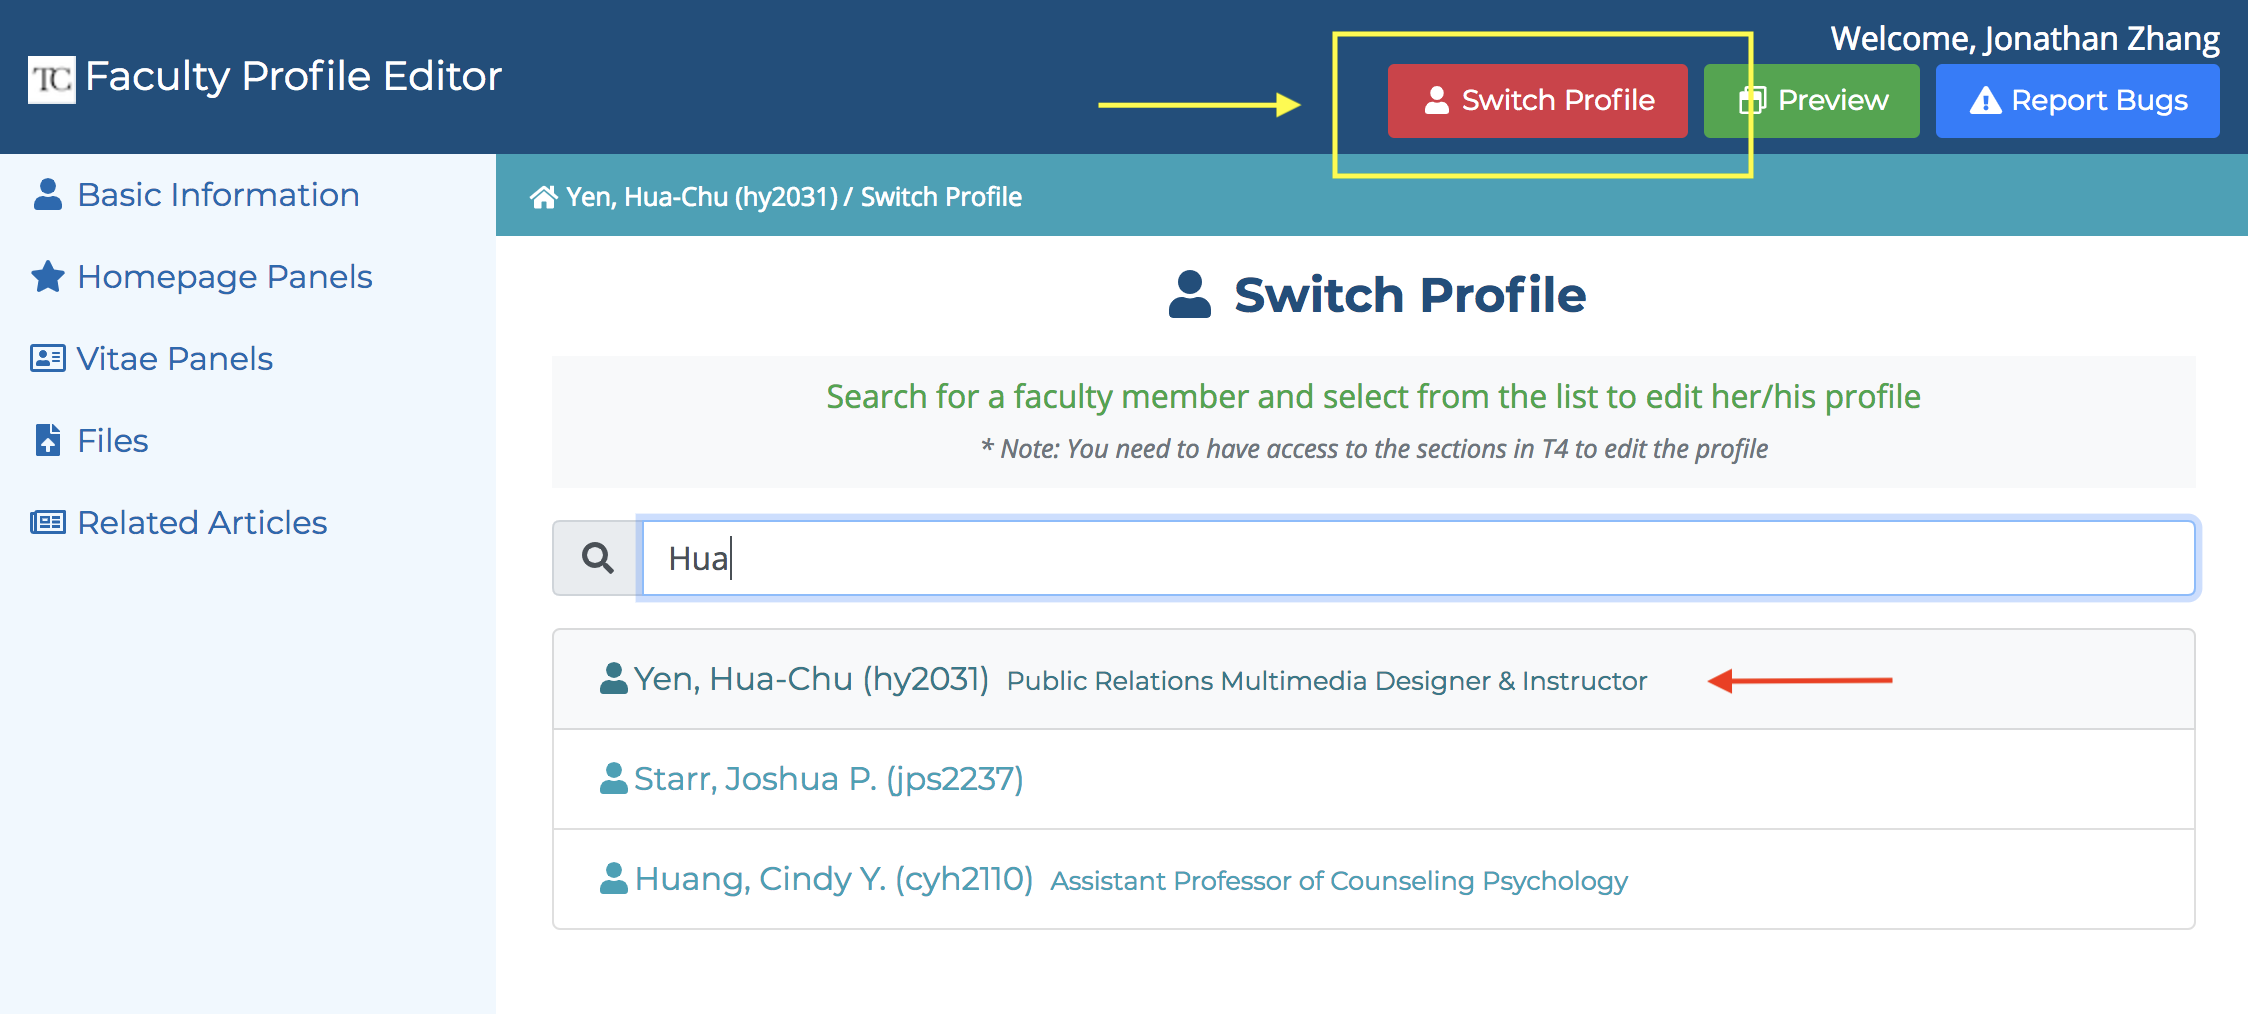 Screenshot of the Switch profile interface in the Faculty Profile Editor